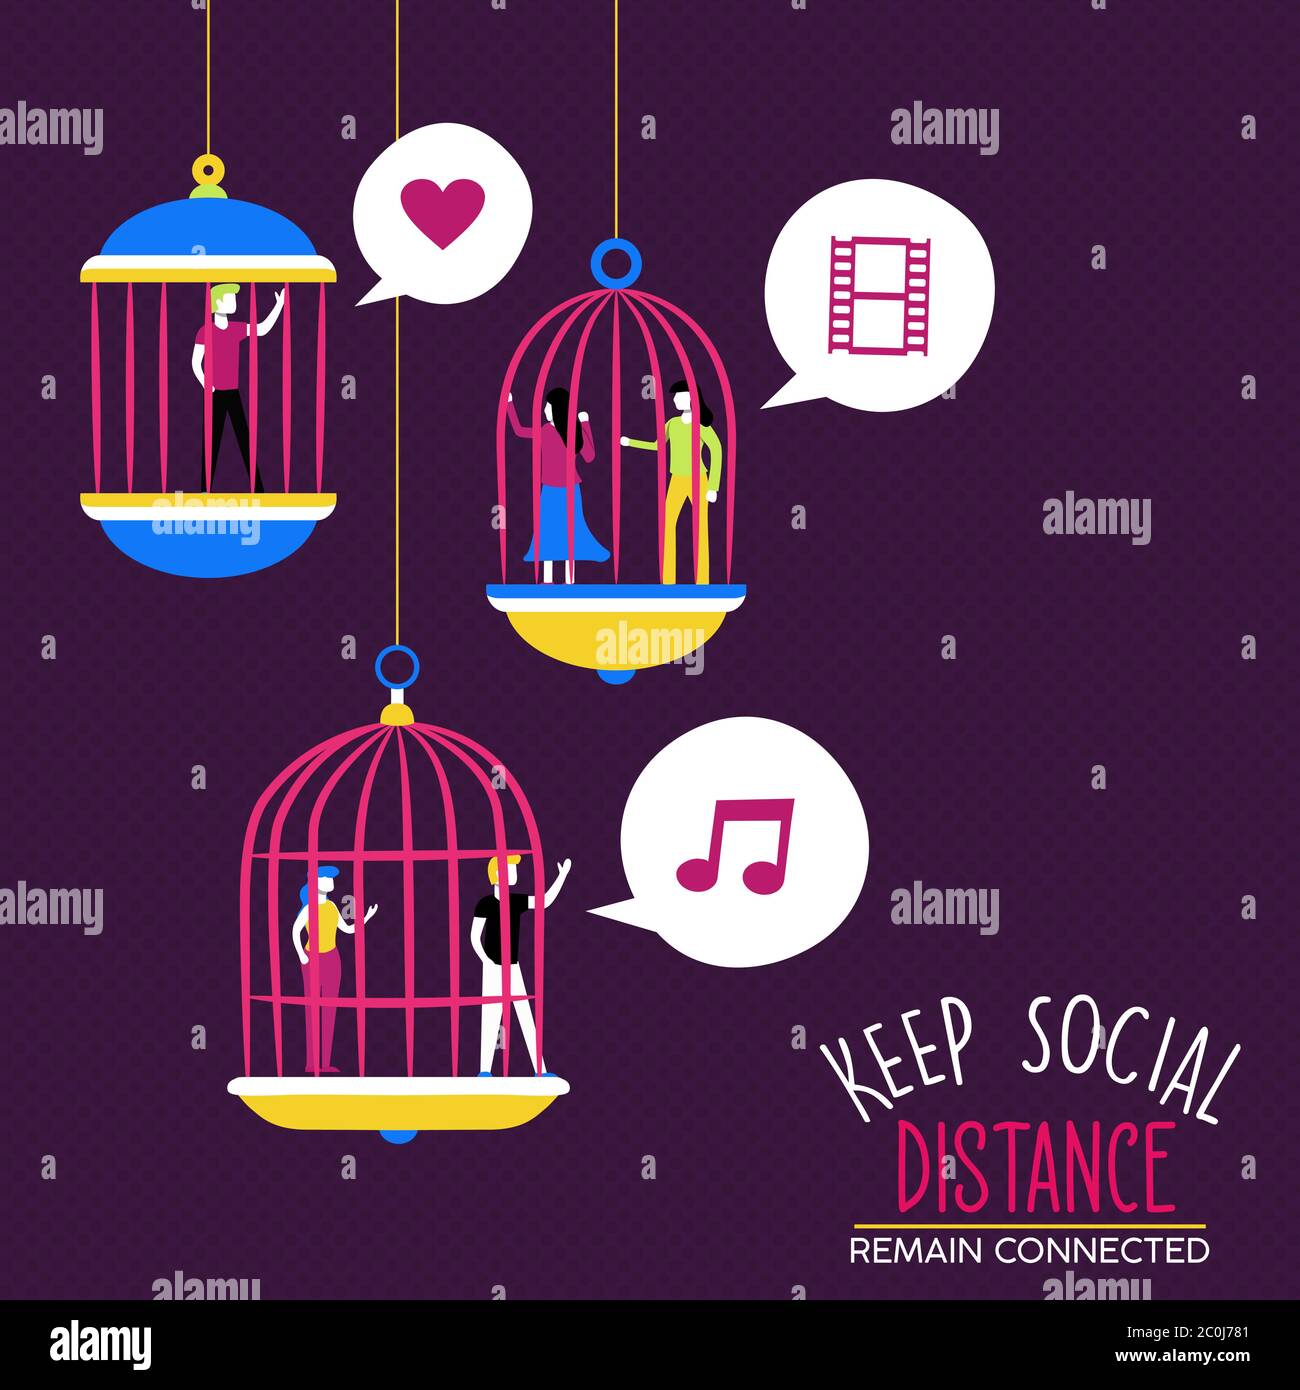 Keep social distance illustration, safety measure concept of trapped people inside bird cage for quarantine isolation, stay connected on internet netw Stock Vector